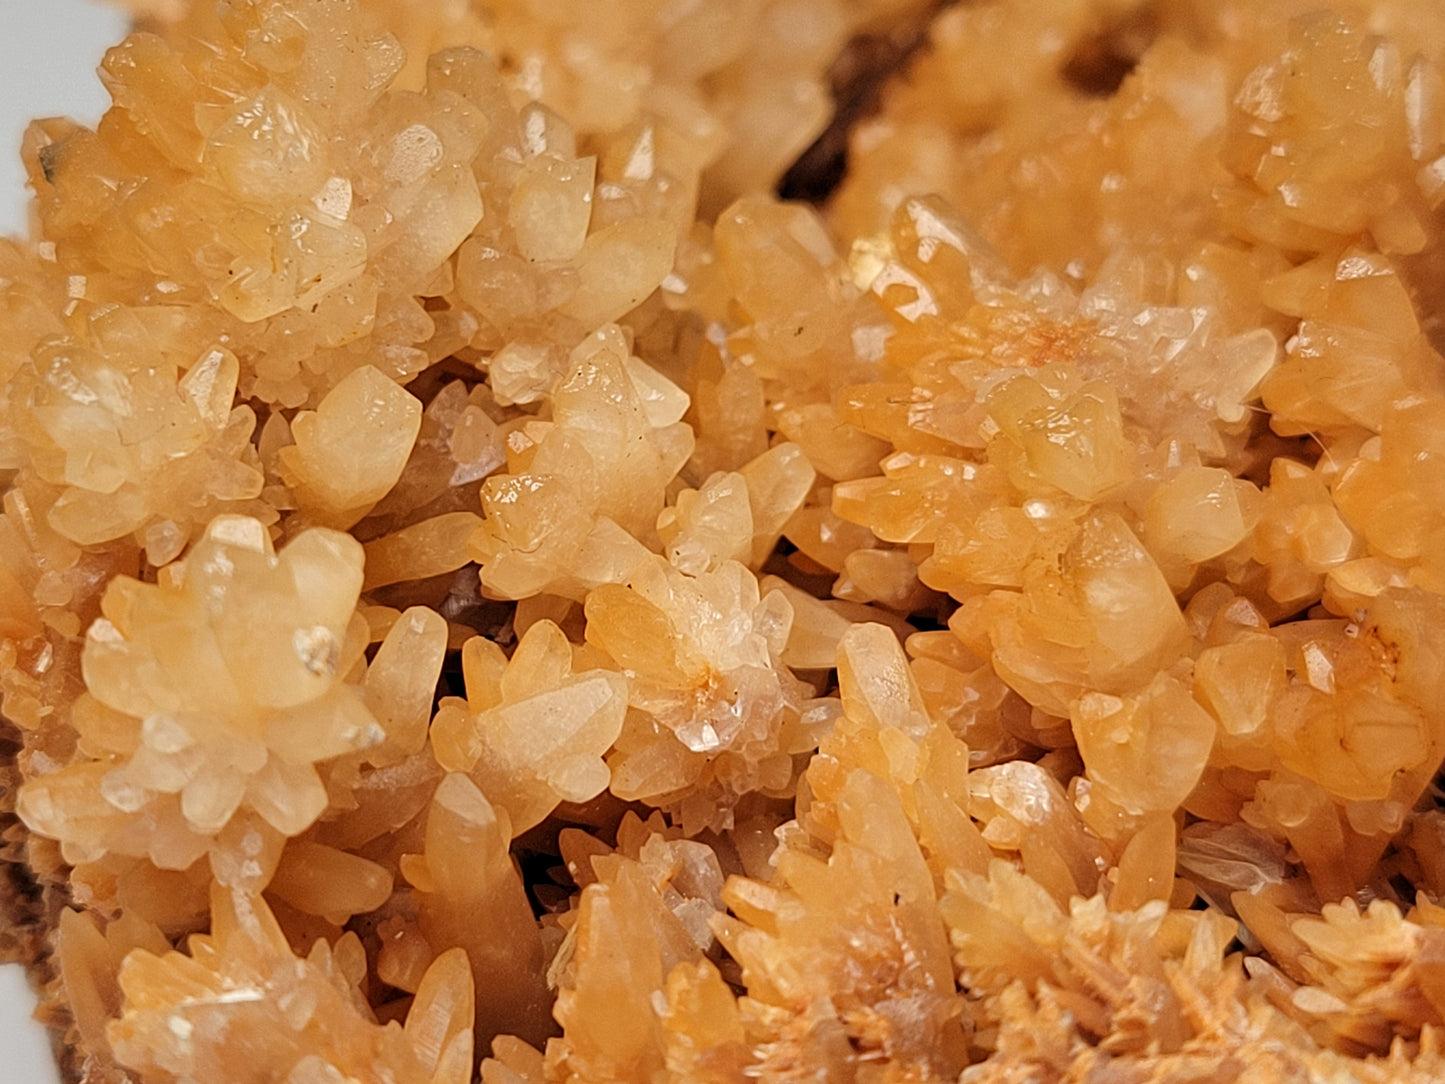 Spiked Orange Calcite Crystal - Raw Spiked Calcite